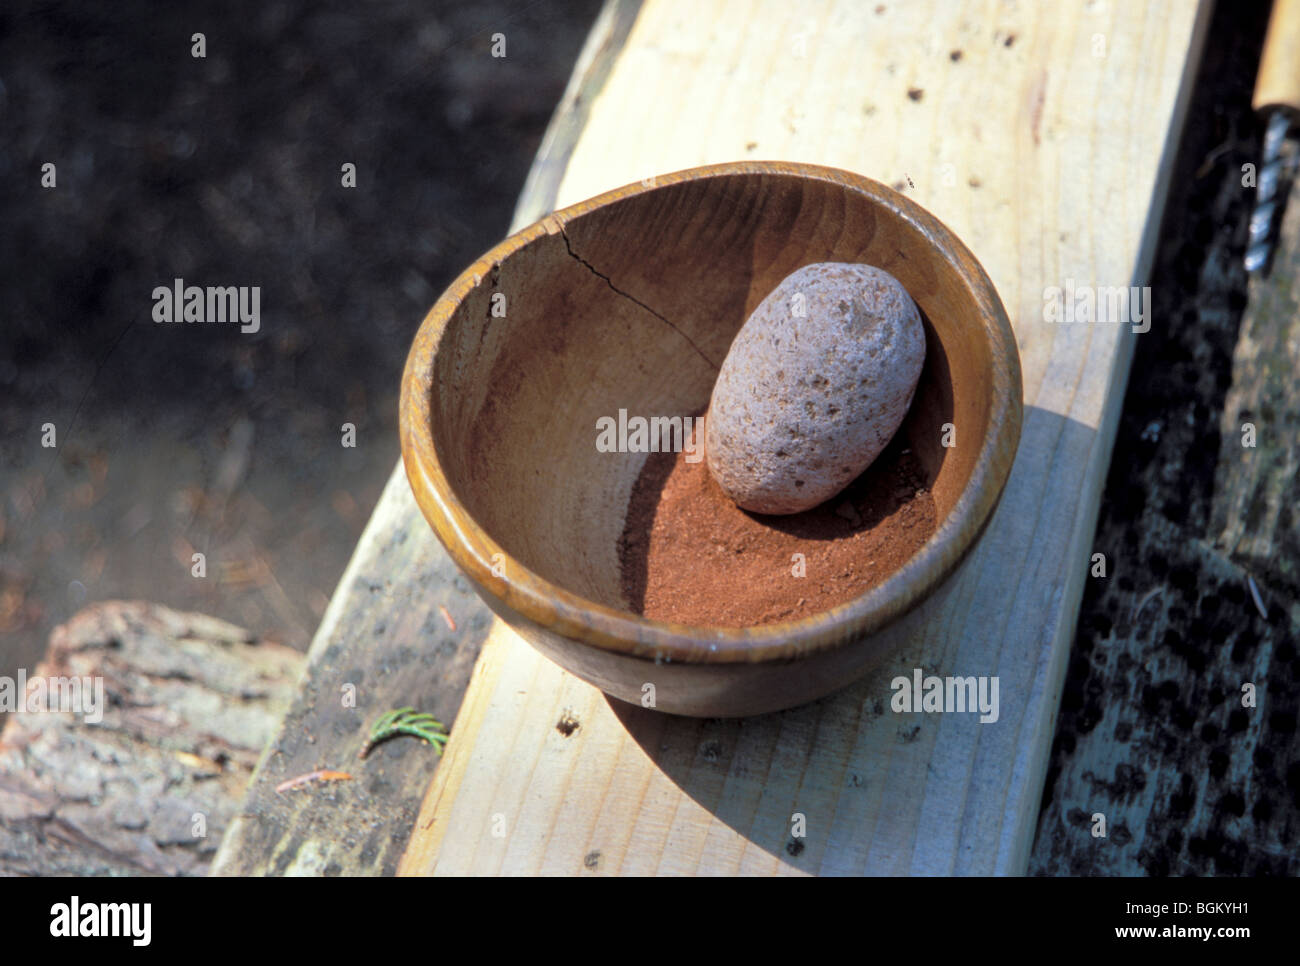 Northwest Coast ceremonial paint inside a cedar carved bowl with ground pigment and a stone tool called a pestle. Stock Photo